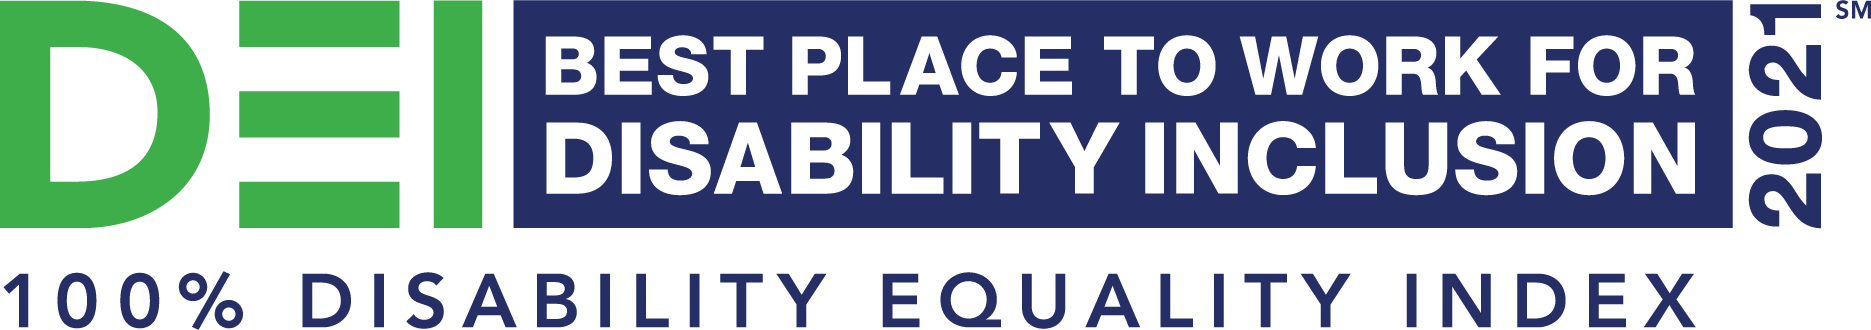 Disability Equality Index (DEI) logo 2021 Best Places to Work for People with Disabilities